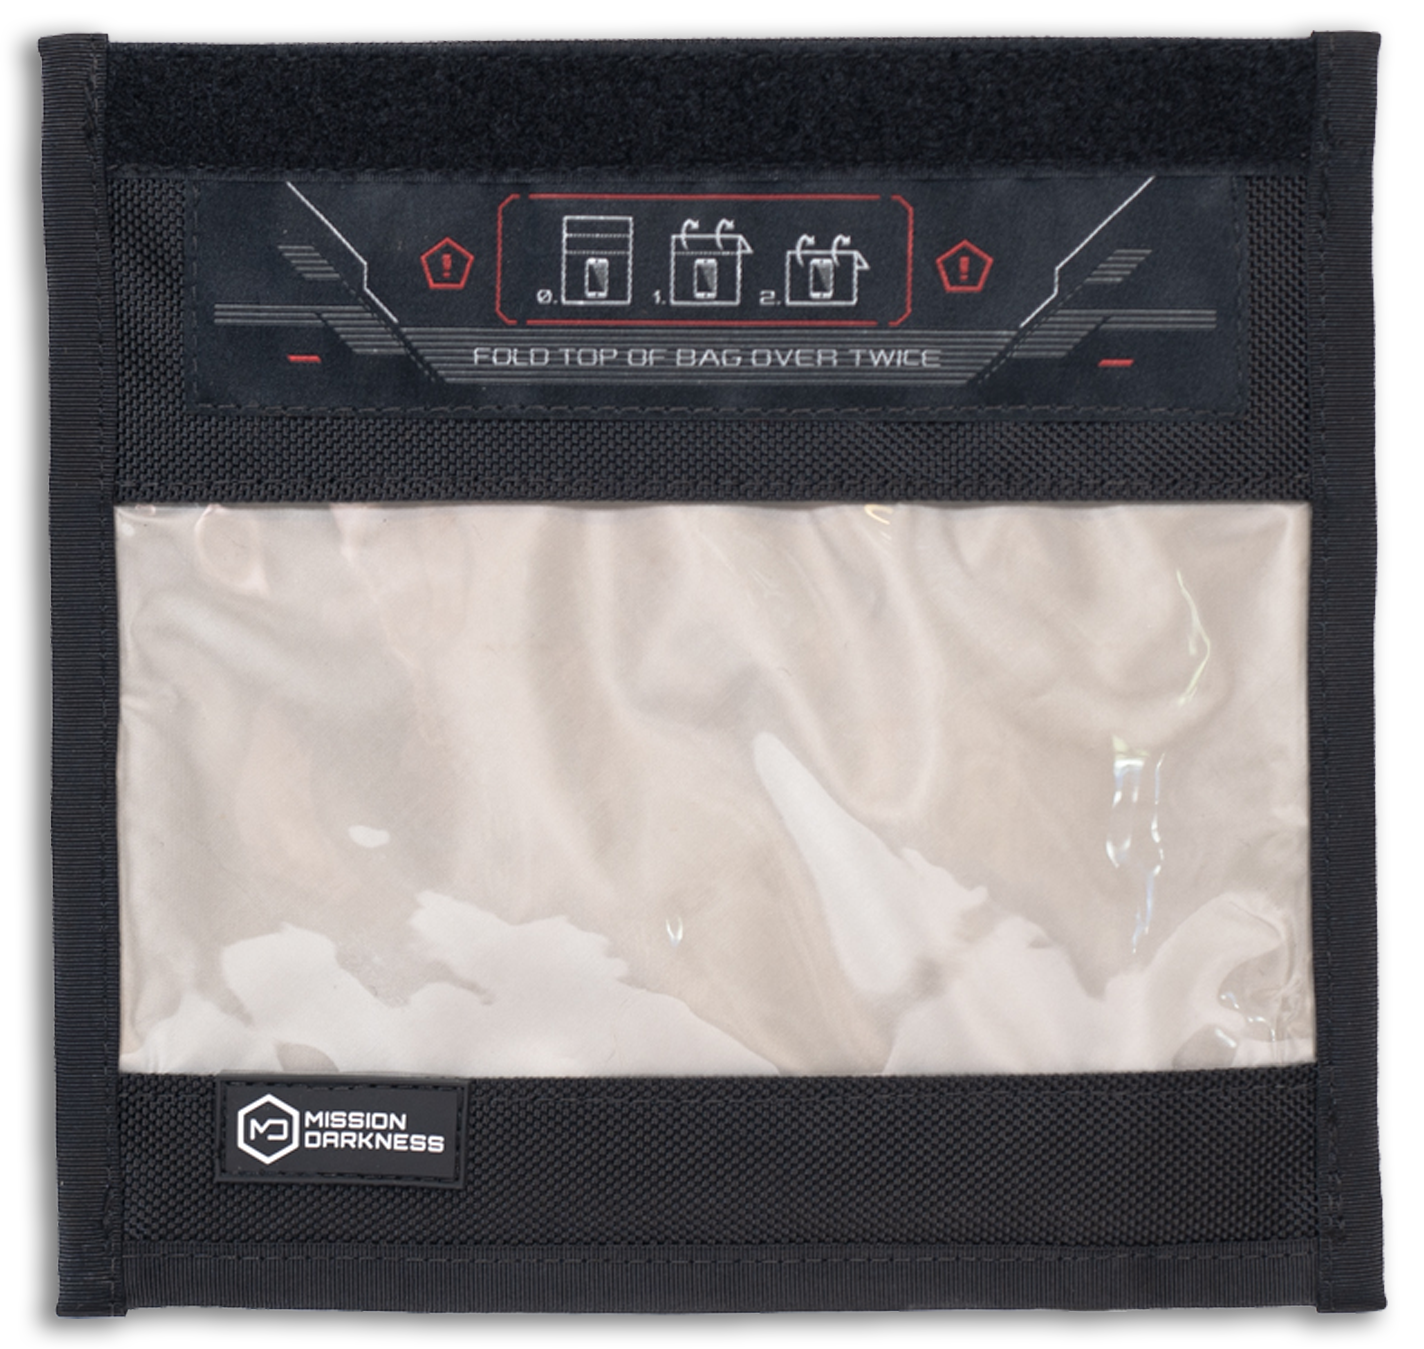 MISSION DARKNESS T10 Faraday Bag for Towers - CDFS - Digital Forensic  Products, Training & Services